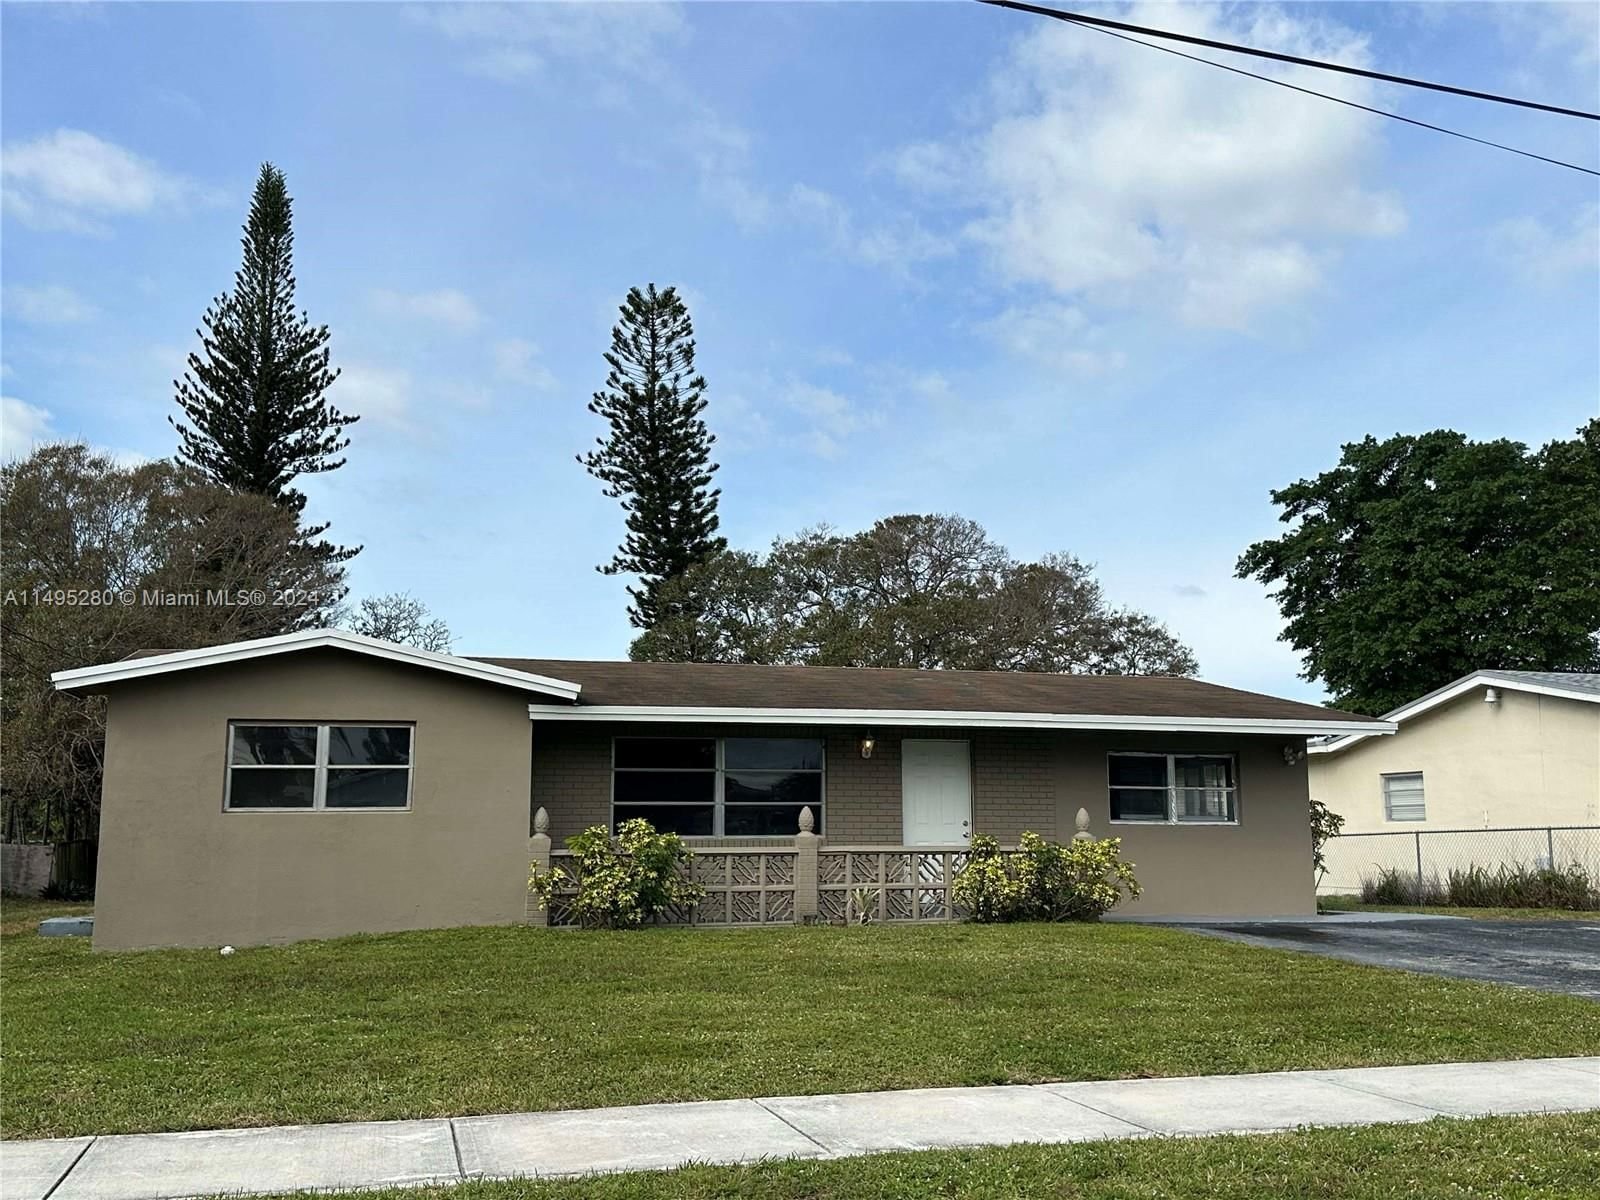 Real estate property located at 2821 24th Ave, Broward County, ZILADEN PROPERTIES, Oakland Park, FL